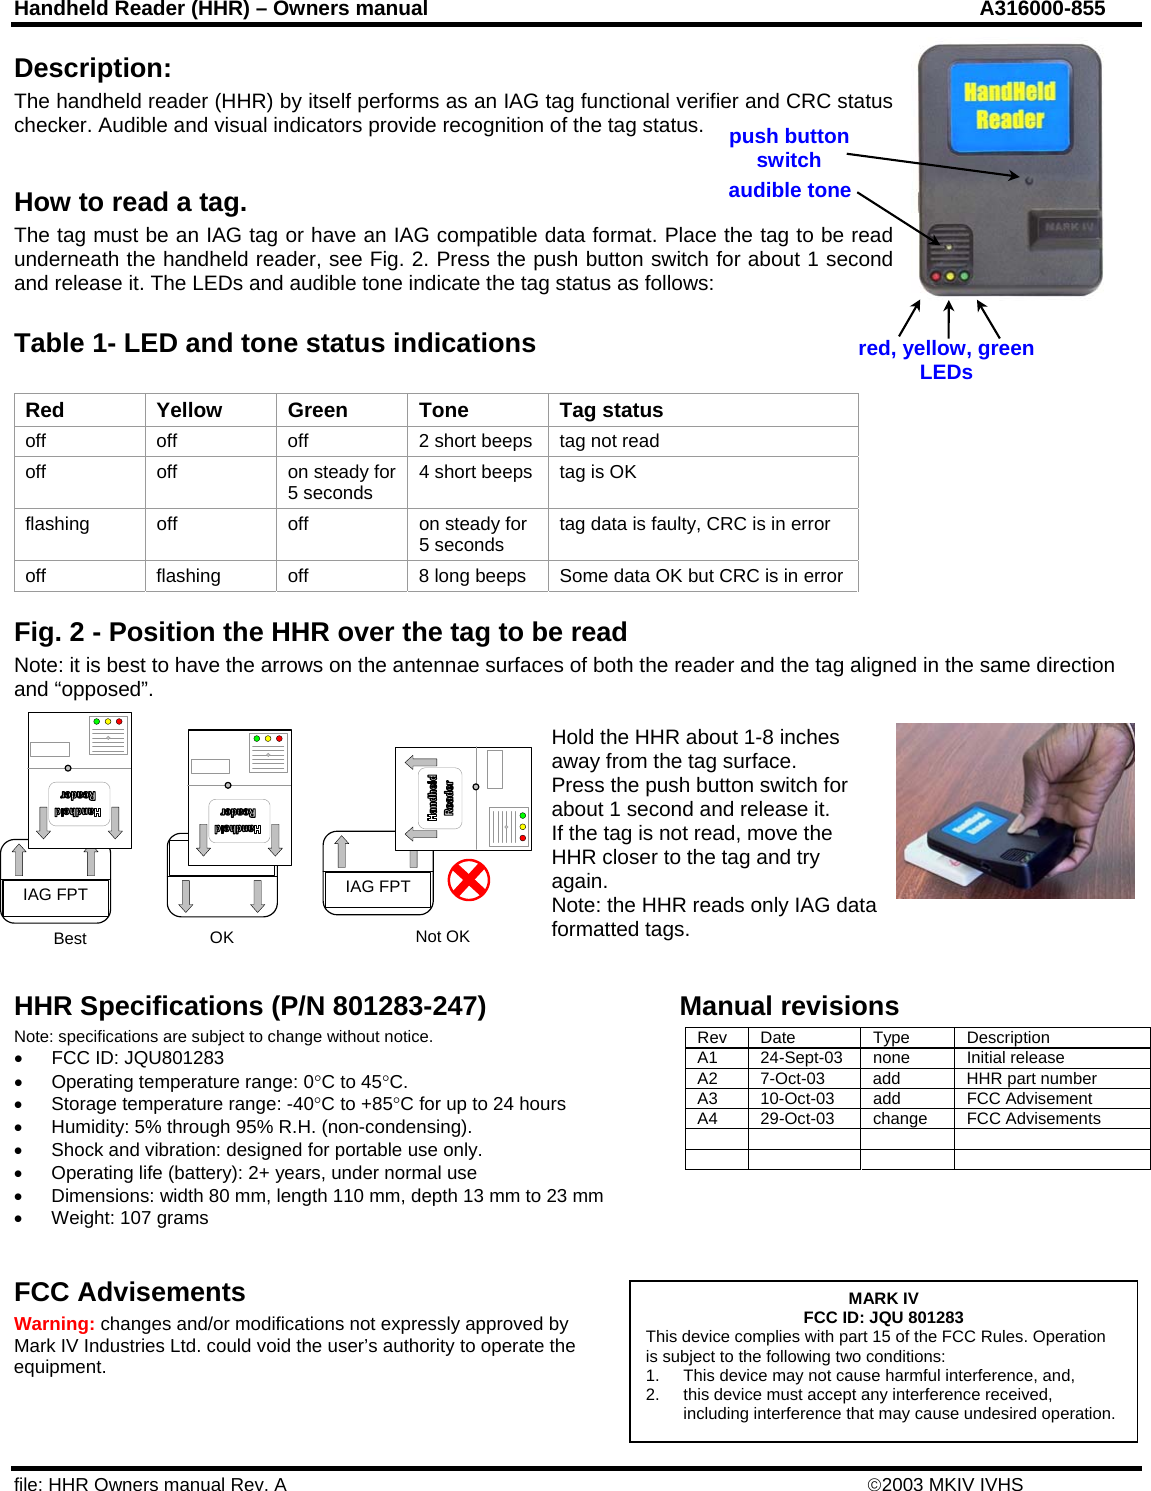 Handheld Reader (HHR) – Owners manual  A316000-855 file: HHR Owners manual Rev. A    ©2003 MKIV IVHS IAG FPT IAG FPT Best  OK  Not OK Description: The handheld reader (HHR) by itself performs as an IAG tag functional verifier and CRC status checker. Audible and visual indicators provide recognition of the tag status.  How to read a tag. The tag must be an IAG tag or have an IAG compatible data format. Place the tag to be read underneath the handheld reader, see Fig. 2. Press the push button switch for about 1 second and release it. The LEDs and audible tone indicate the tag status as follows: audible tone push button switchred, yellow, green LEDs Table 1- LED and tone status indications Red Yellow Green Tone Tag status off  off  off  2 short beeps  tag not read off off on steady for 5 seconds  4 short beeps  tag is OK flashing off  off  on steady for 5 seconds  tag data is faulty, CRC is in error off  flashing  off  8 long beeps  Some data OK but CRC is in error Fig. 2 - Position the HHR over the tag to be read Note: it is best to have the arrows on the antennae surfaces of both the reader and the tag aligned in the same direction and “opposed”.   Hold the HHR about 1-8 inches away from the tag surface. Press the push button switch for about 1 second and release it.  If the tag is not read, move the HHR closer to the tag and try again. Note: the HHR reads only IAG dformatted tags.  ata  HHR Specifications (P/N 801283-247) Manual revisions Note: specifications are subject to change without notice.  Rev Date  Type  Description A1  24-Sept-03  none  Initial release  A2  7-Oct-03  add  HHR part number A3 10-Oct-03 add  FCC Advisement A4 29-Oct-03 change FCC Advisements             •  FCC ID: JQU801283 •  Operating temperature range: 0°C to 45°C. •  Storage temperature range: -40°C to +85°C for up to 24 hours •  Humidity: 5% through 95% R.H. (non-condensing). •  Shock and vibration: designed for portable use only. •  Operating life (battery): 2+ years, under normal use •  Dimensions: width 80 mm, length 110 mm, depth 13 mm to 23 mm •  Weight: 107 grams  FCC Advisements  MARK IV FCC ID: JQU 801283 This device complies with part 15 of the FCC Rules. Operation is subject to the following two conditions: 1.  This device may not cause harmful interference, and, 2.  this device must accept any interference received, including interference that may cause undesired operation.Warning: changes and/or modifications not expressly approved by Mark IV Industries Ltd. could void the user’s authority to operate the equipment. 